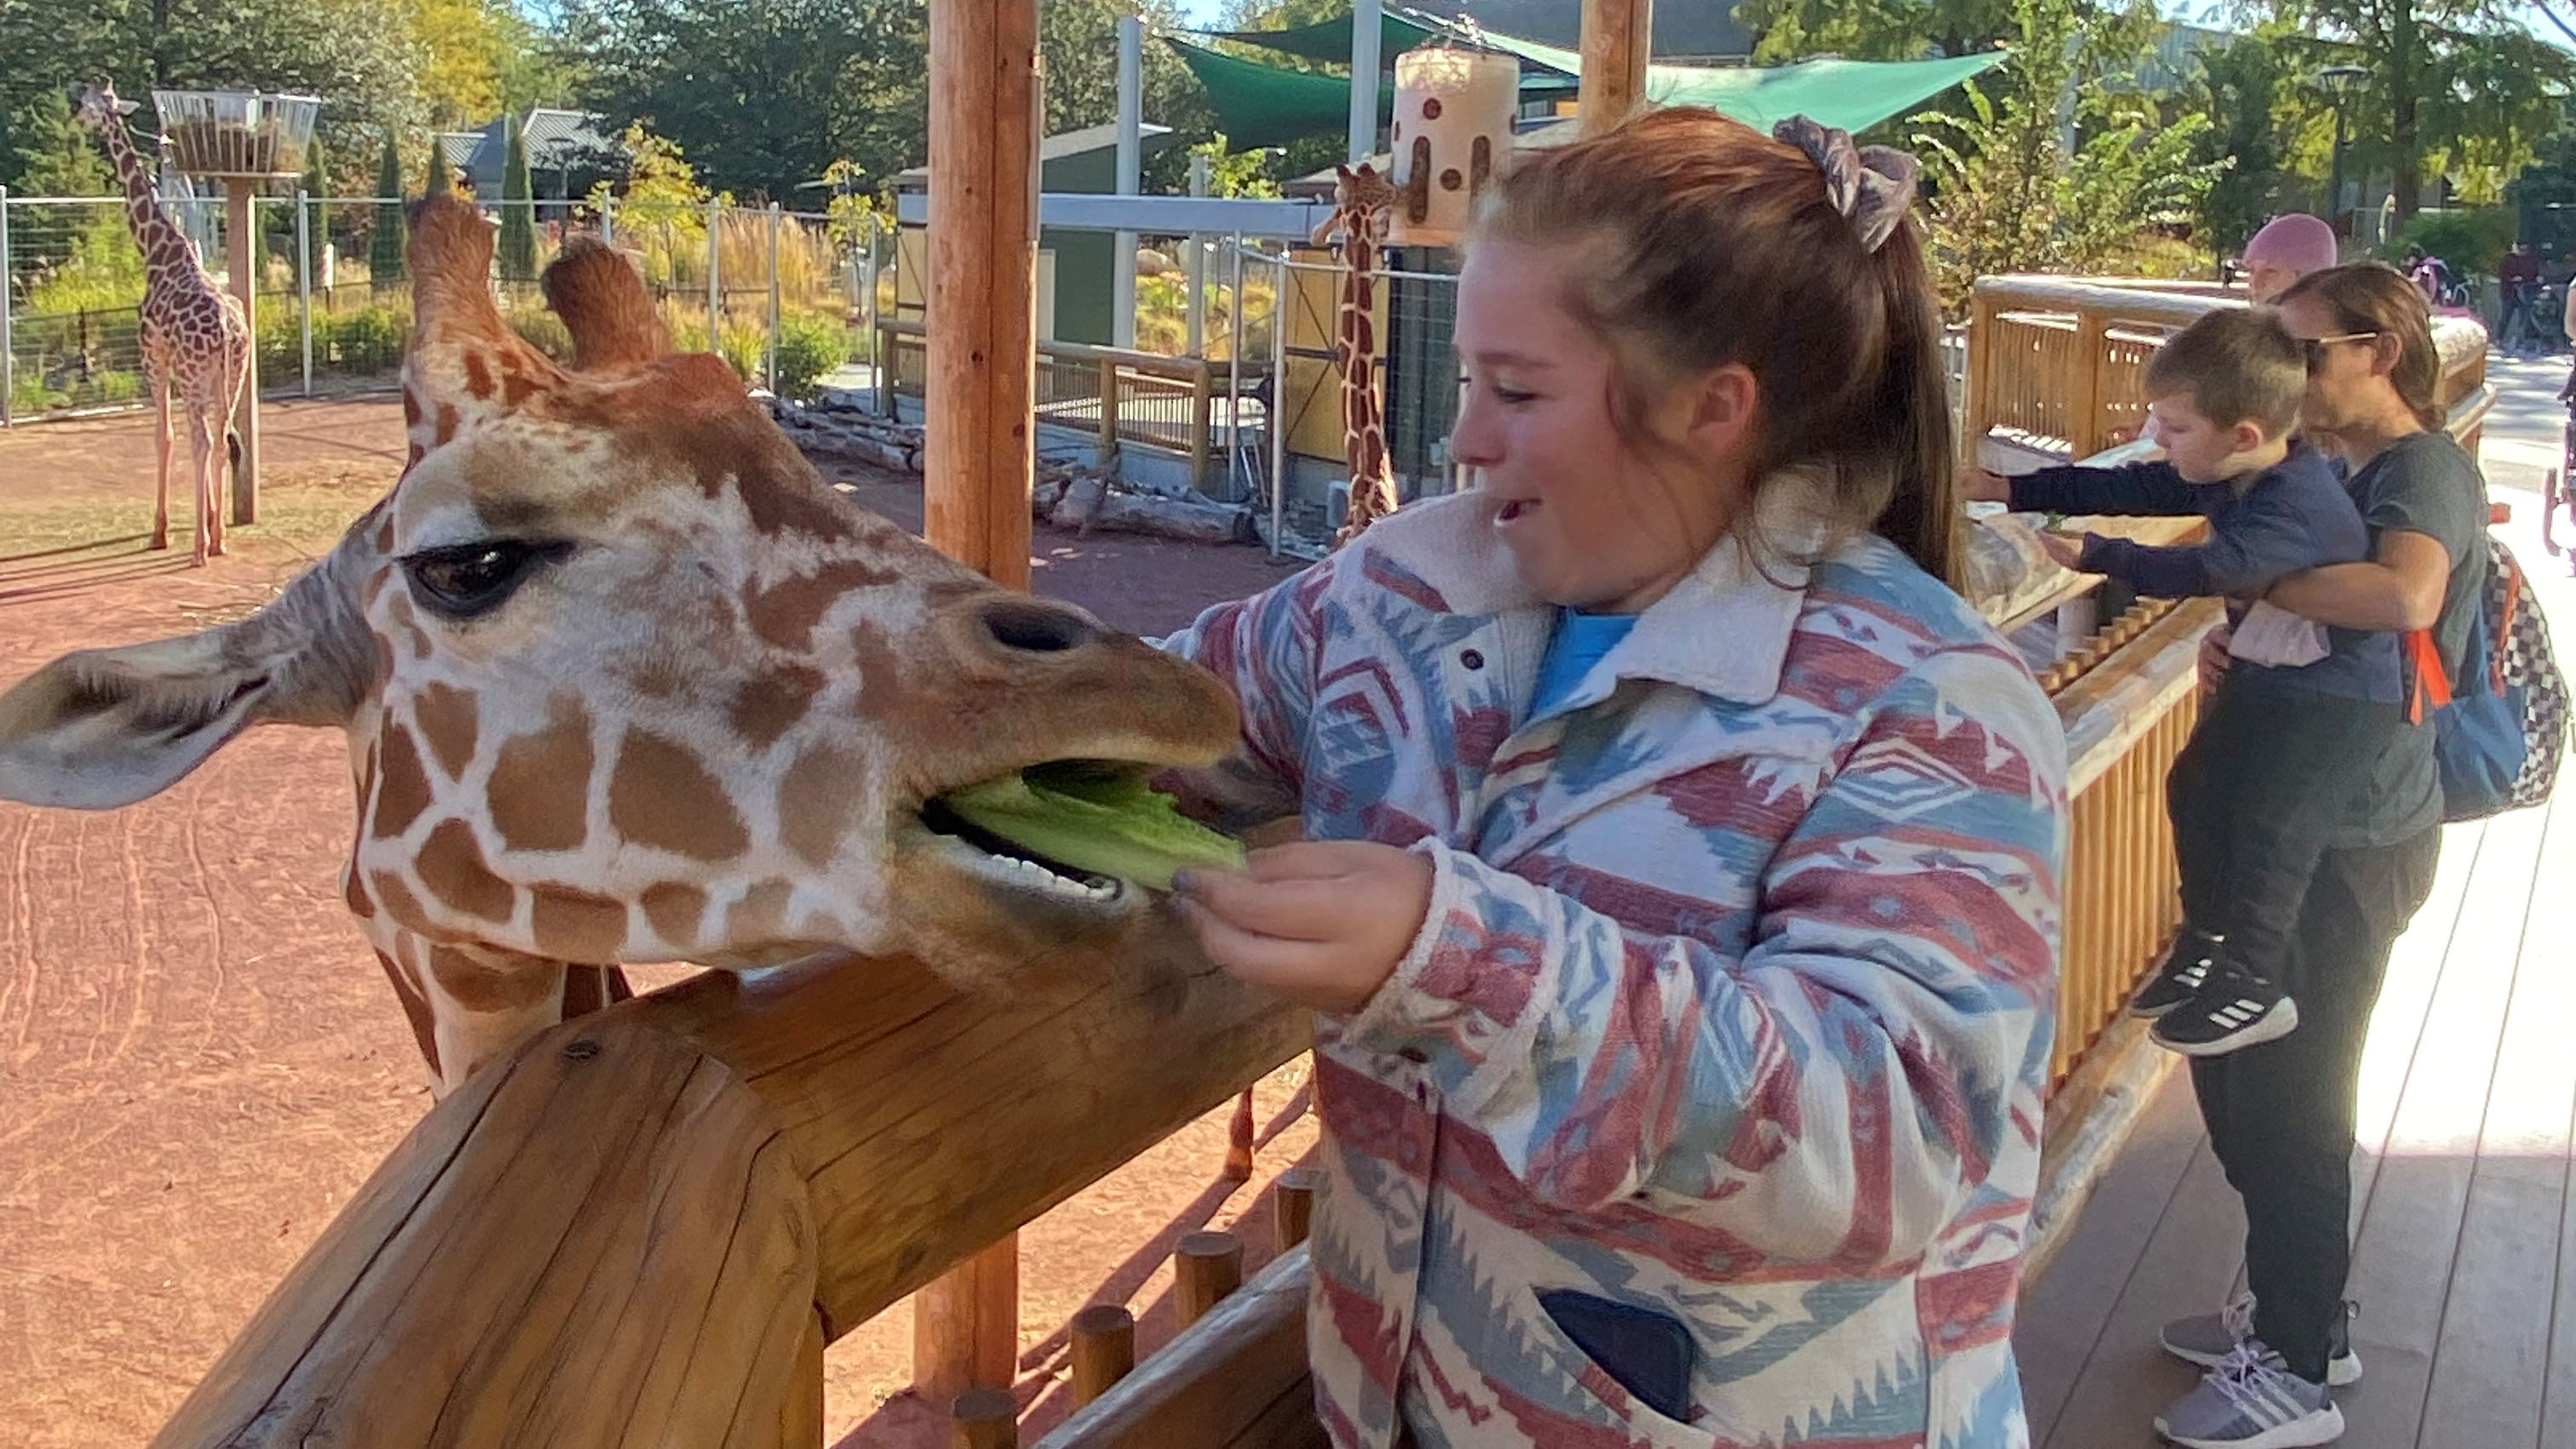 Emma Hollenback, a Nebraska College of Technical Agriculture Aggie feeds a giraffe at the Children's Zoo in Lincoln. The Student Technicians of Veterinary Medicine Association enjoyed a field trip over fall break. (Photo by Melody MacDonald) 